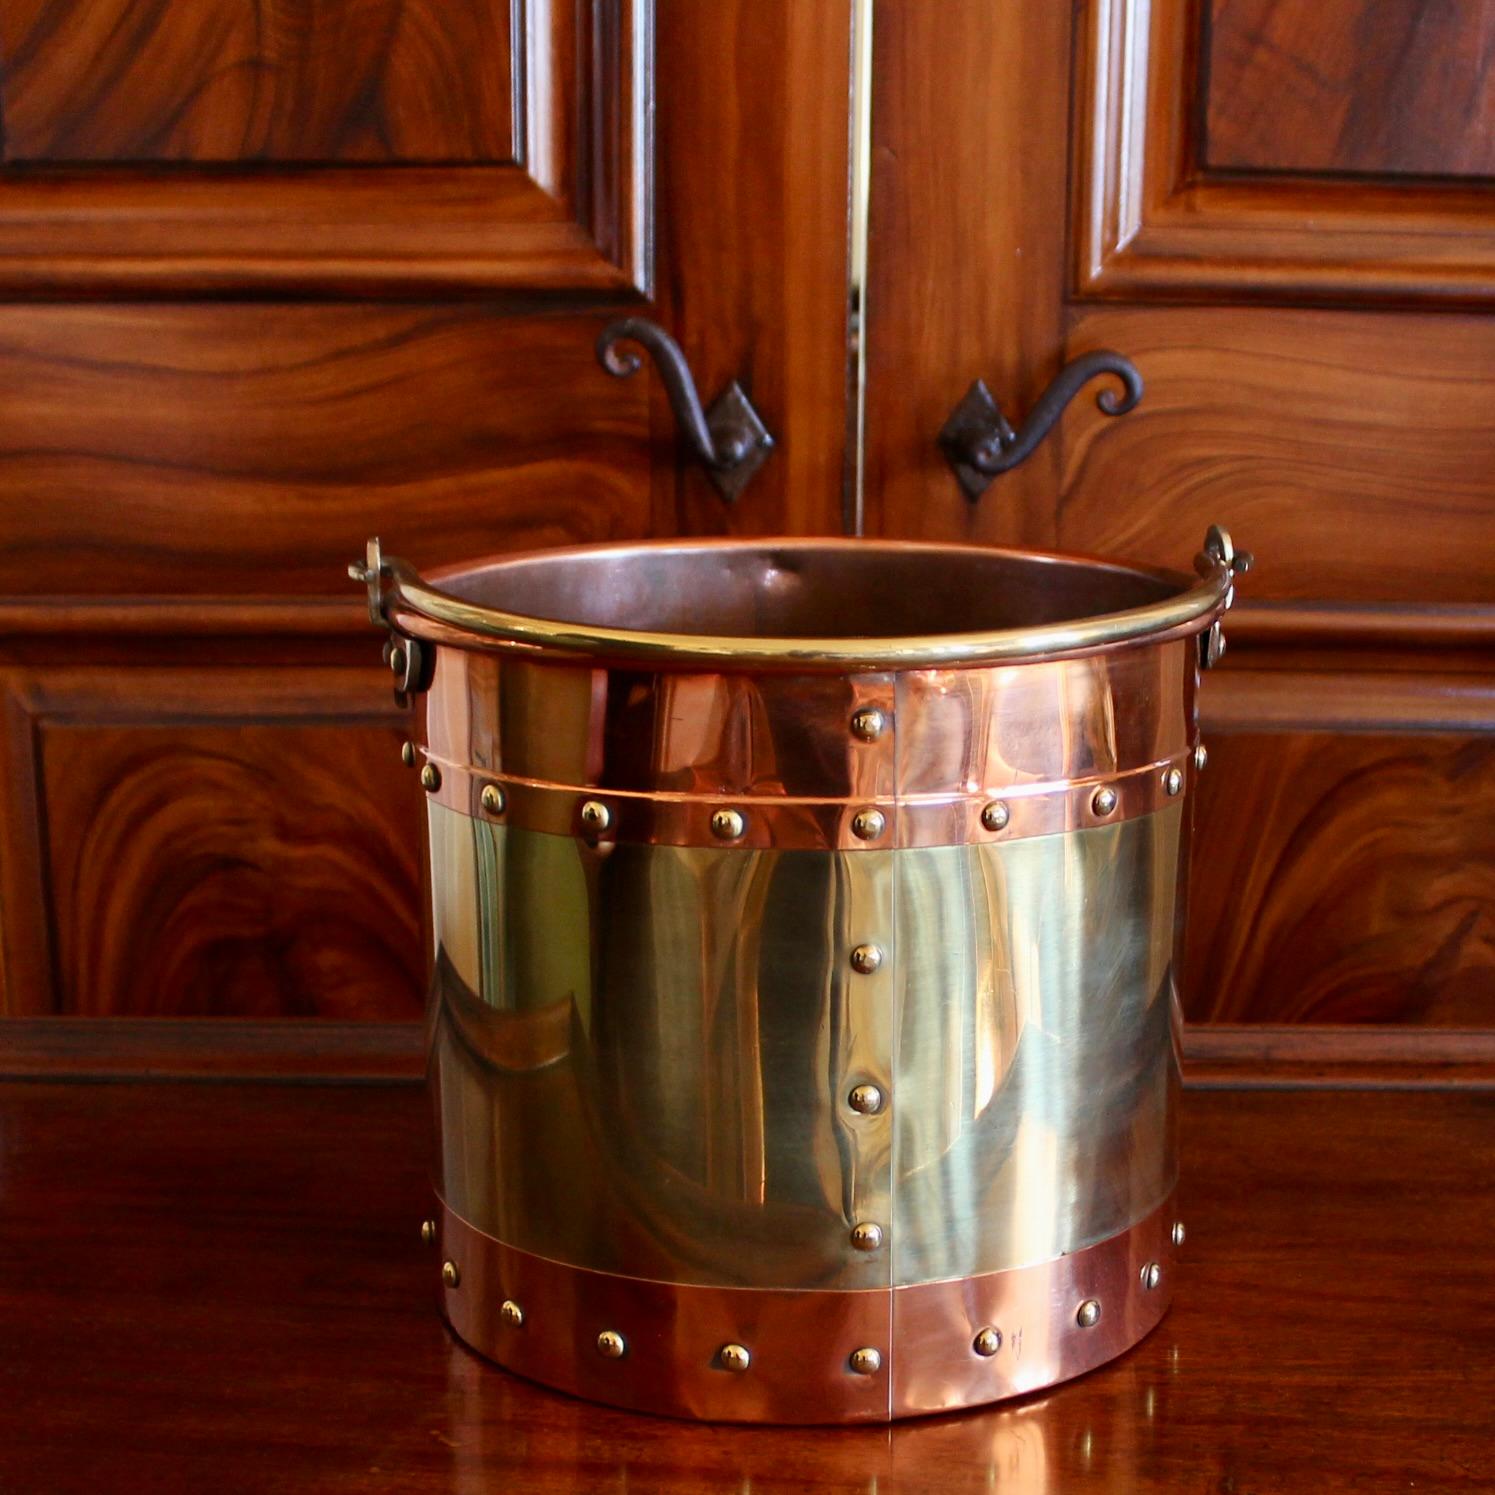 Substantial brass fireplace buckets banded top and bottom with copper, and attractively studded along the seams. A great English look, suitable for kindling, fancy wastebaskets, etc. Polished. Some irregularities as made, variations to patina.